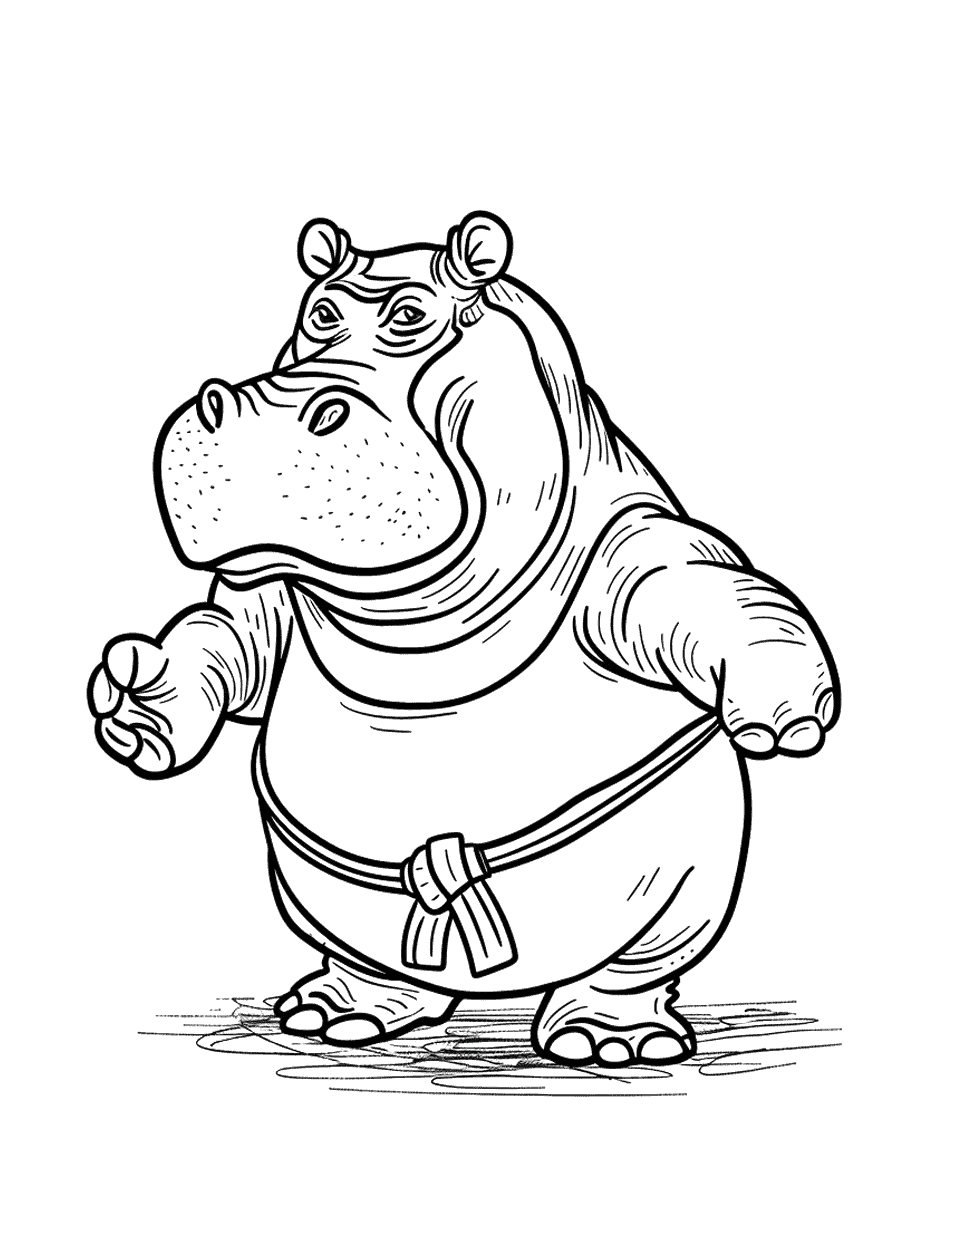 Hippo Karate Class Coloring Page - Hippos practicing martial arts moves.